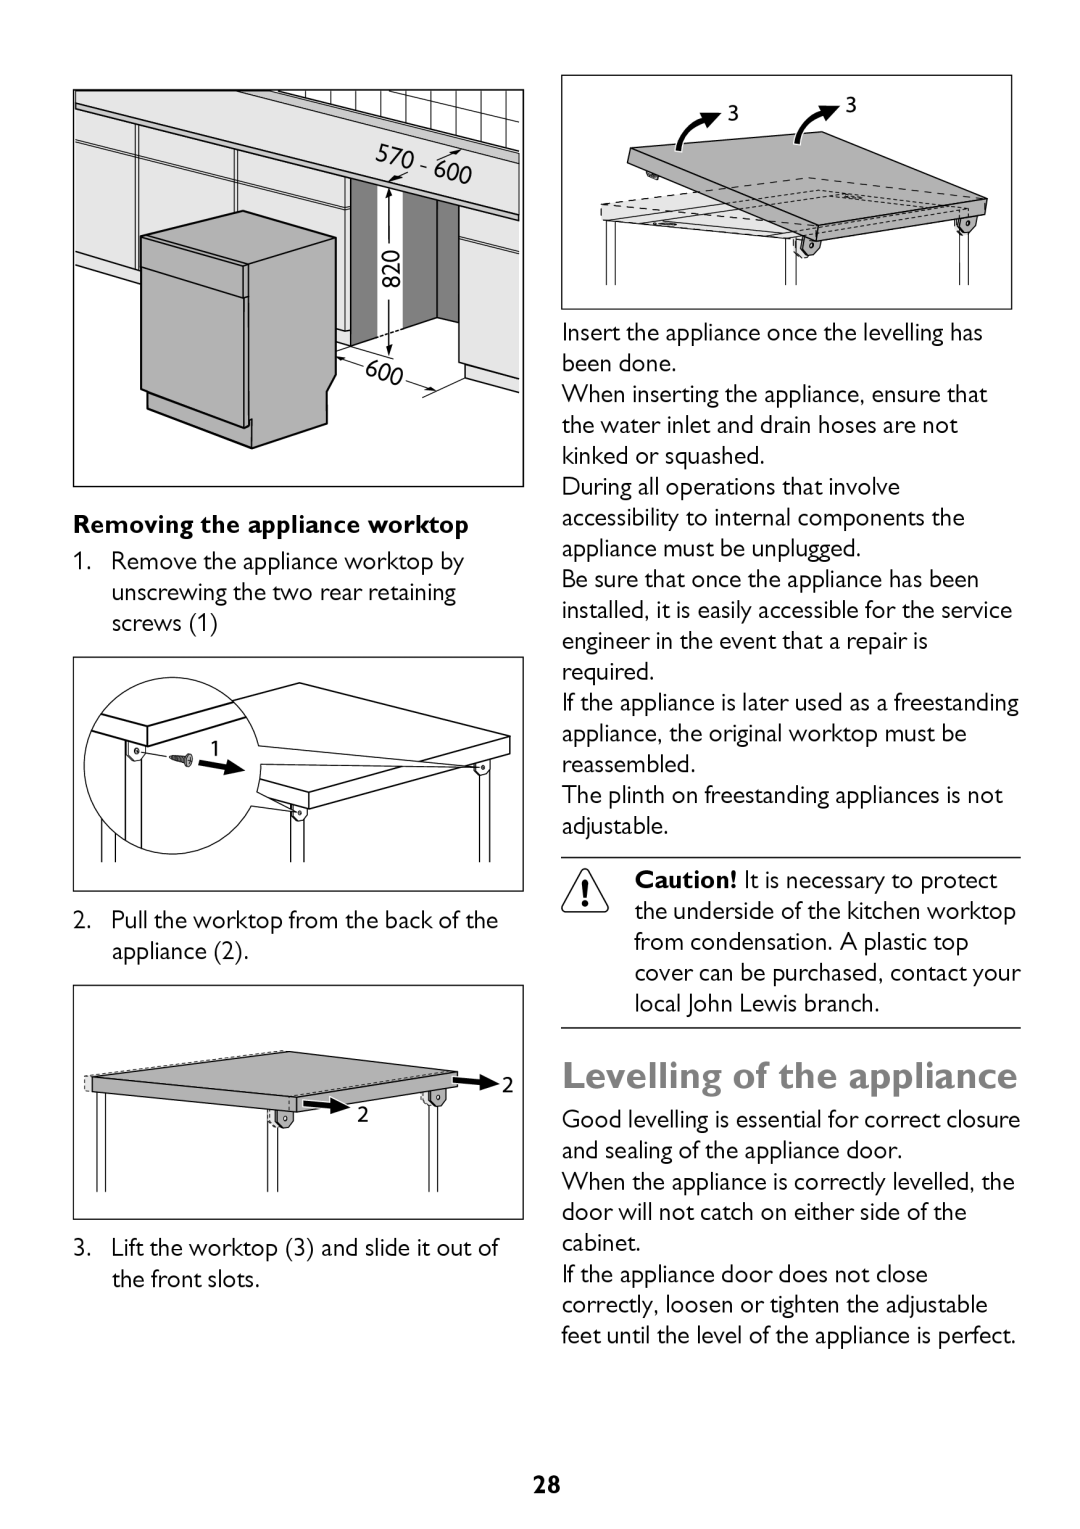 John Lewis JLDW 1221 instruction manual Levelling of the appliance, Removing the appliance worktop 